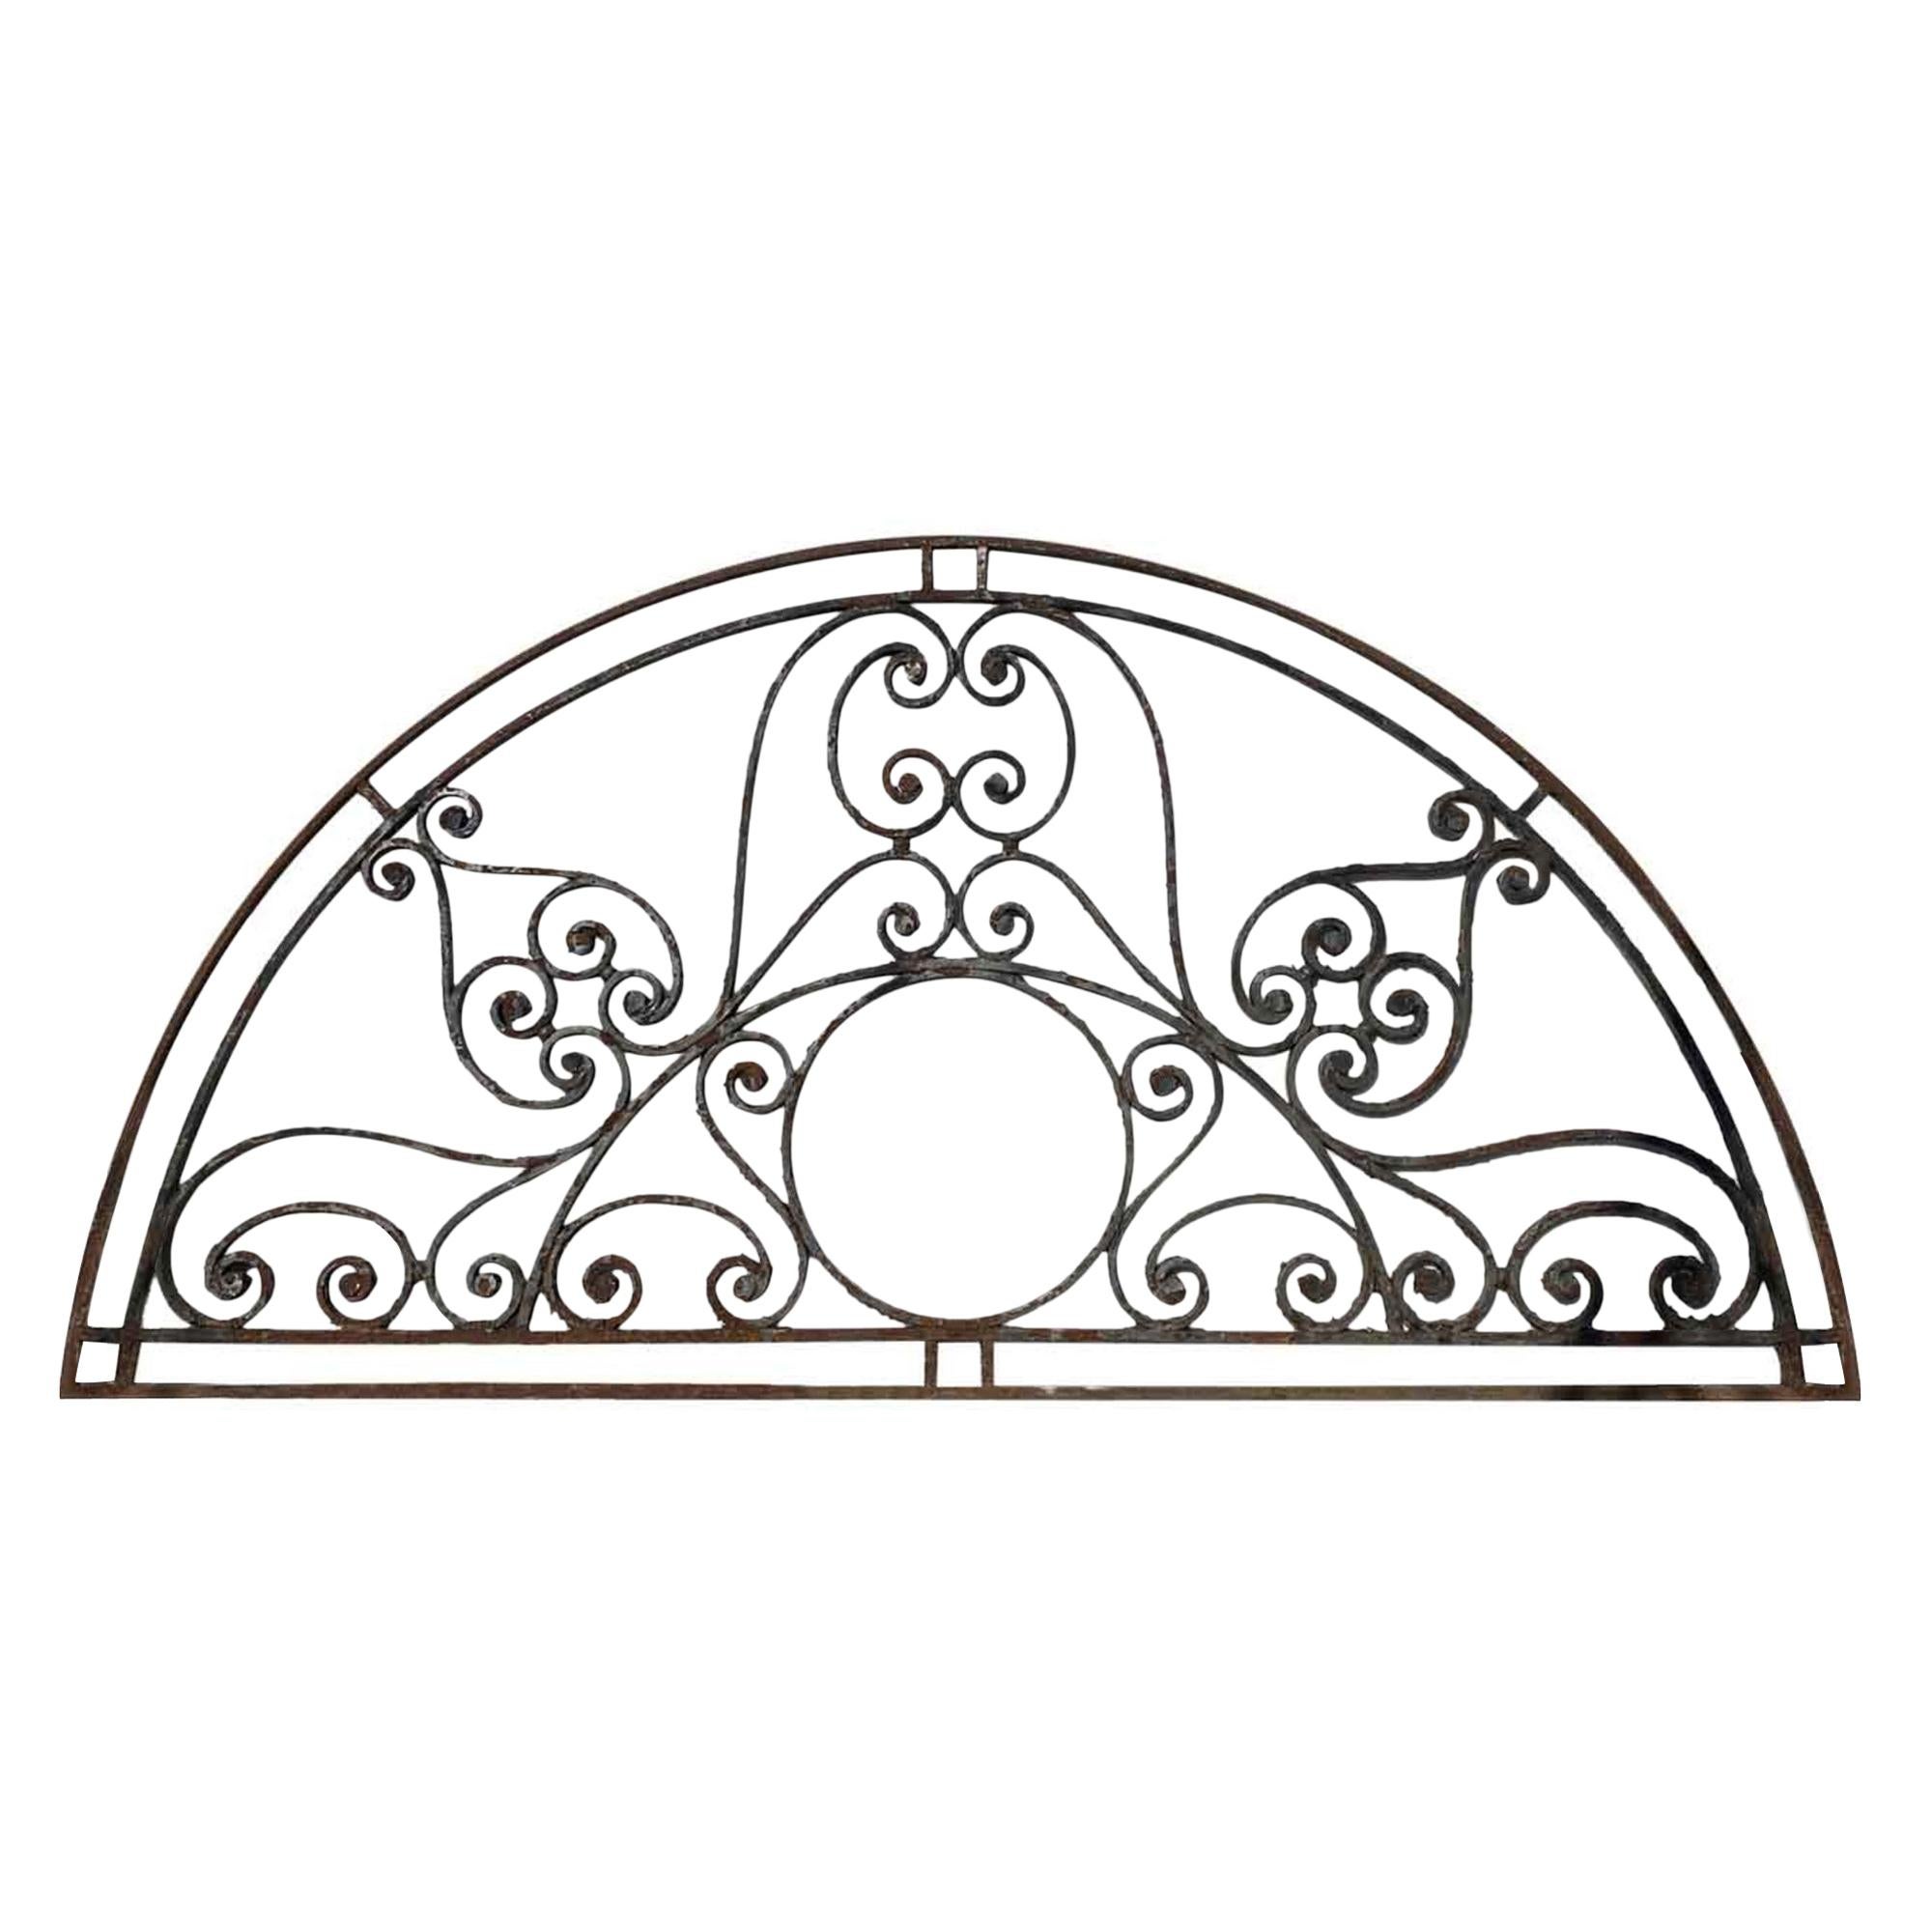 1890s Ornate Wrought Iron Arched Door Transom with Hand Forged Curls